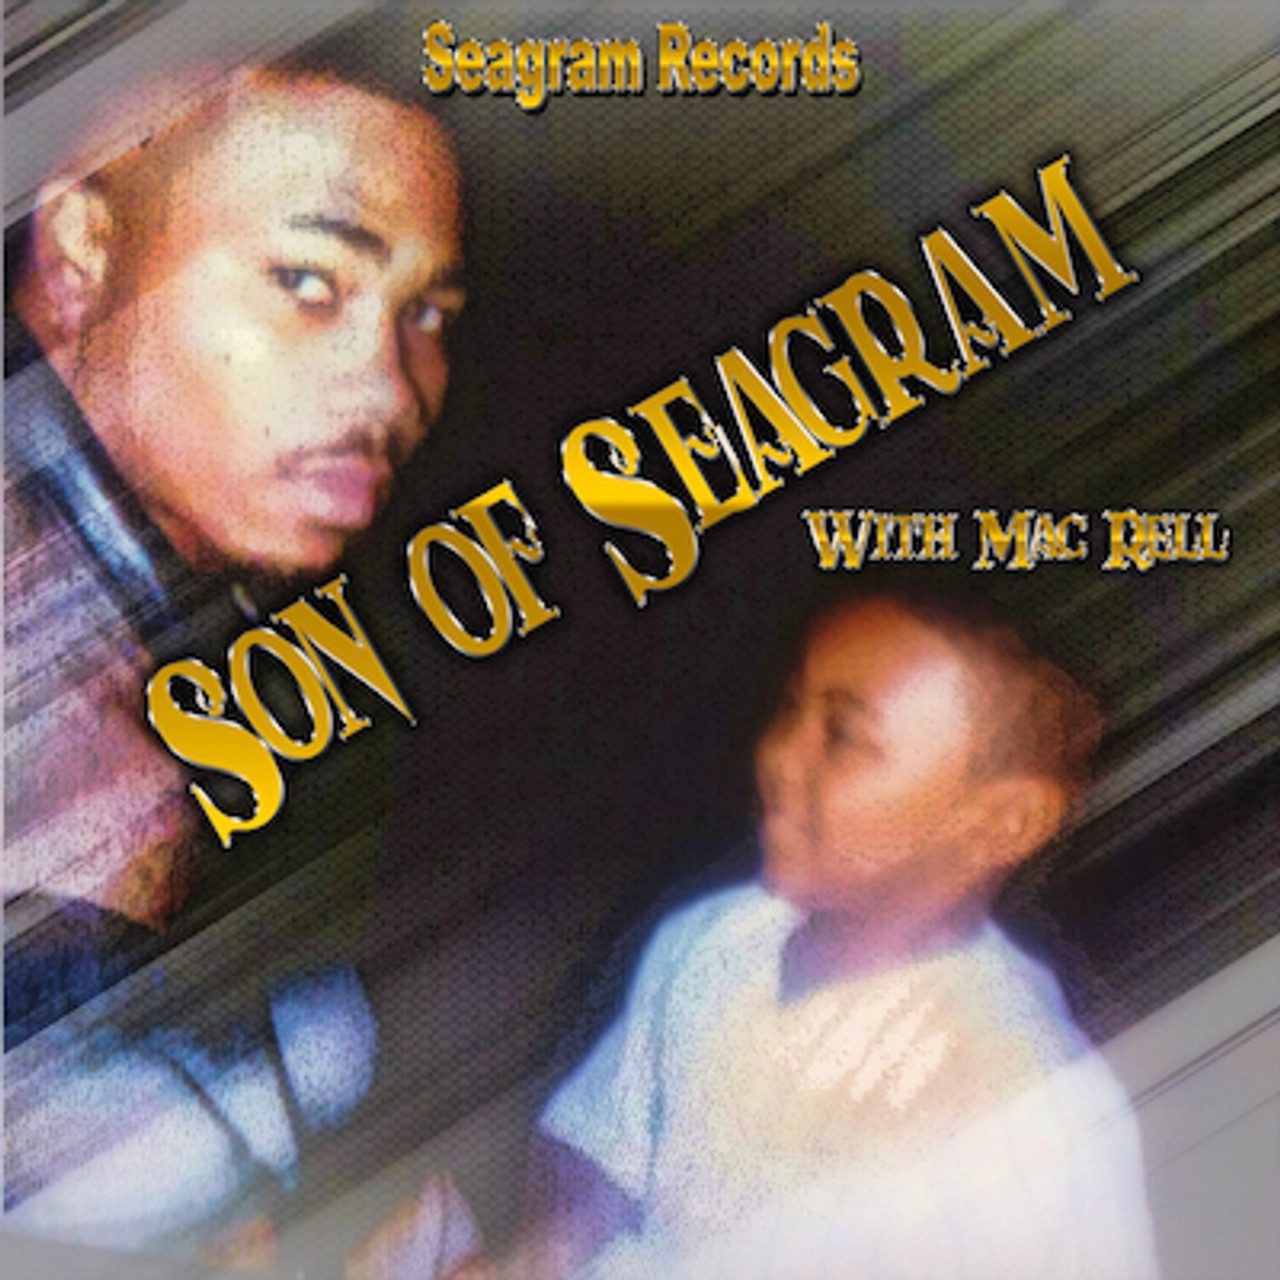 Mac Rell - Son Of Seagram